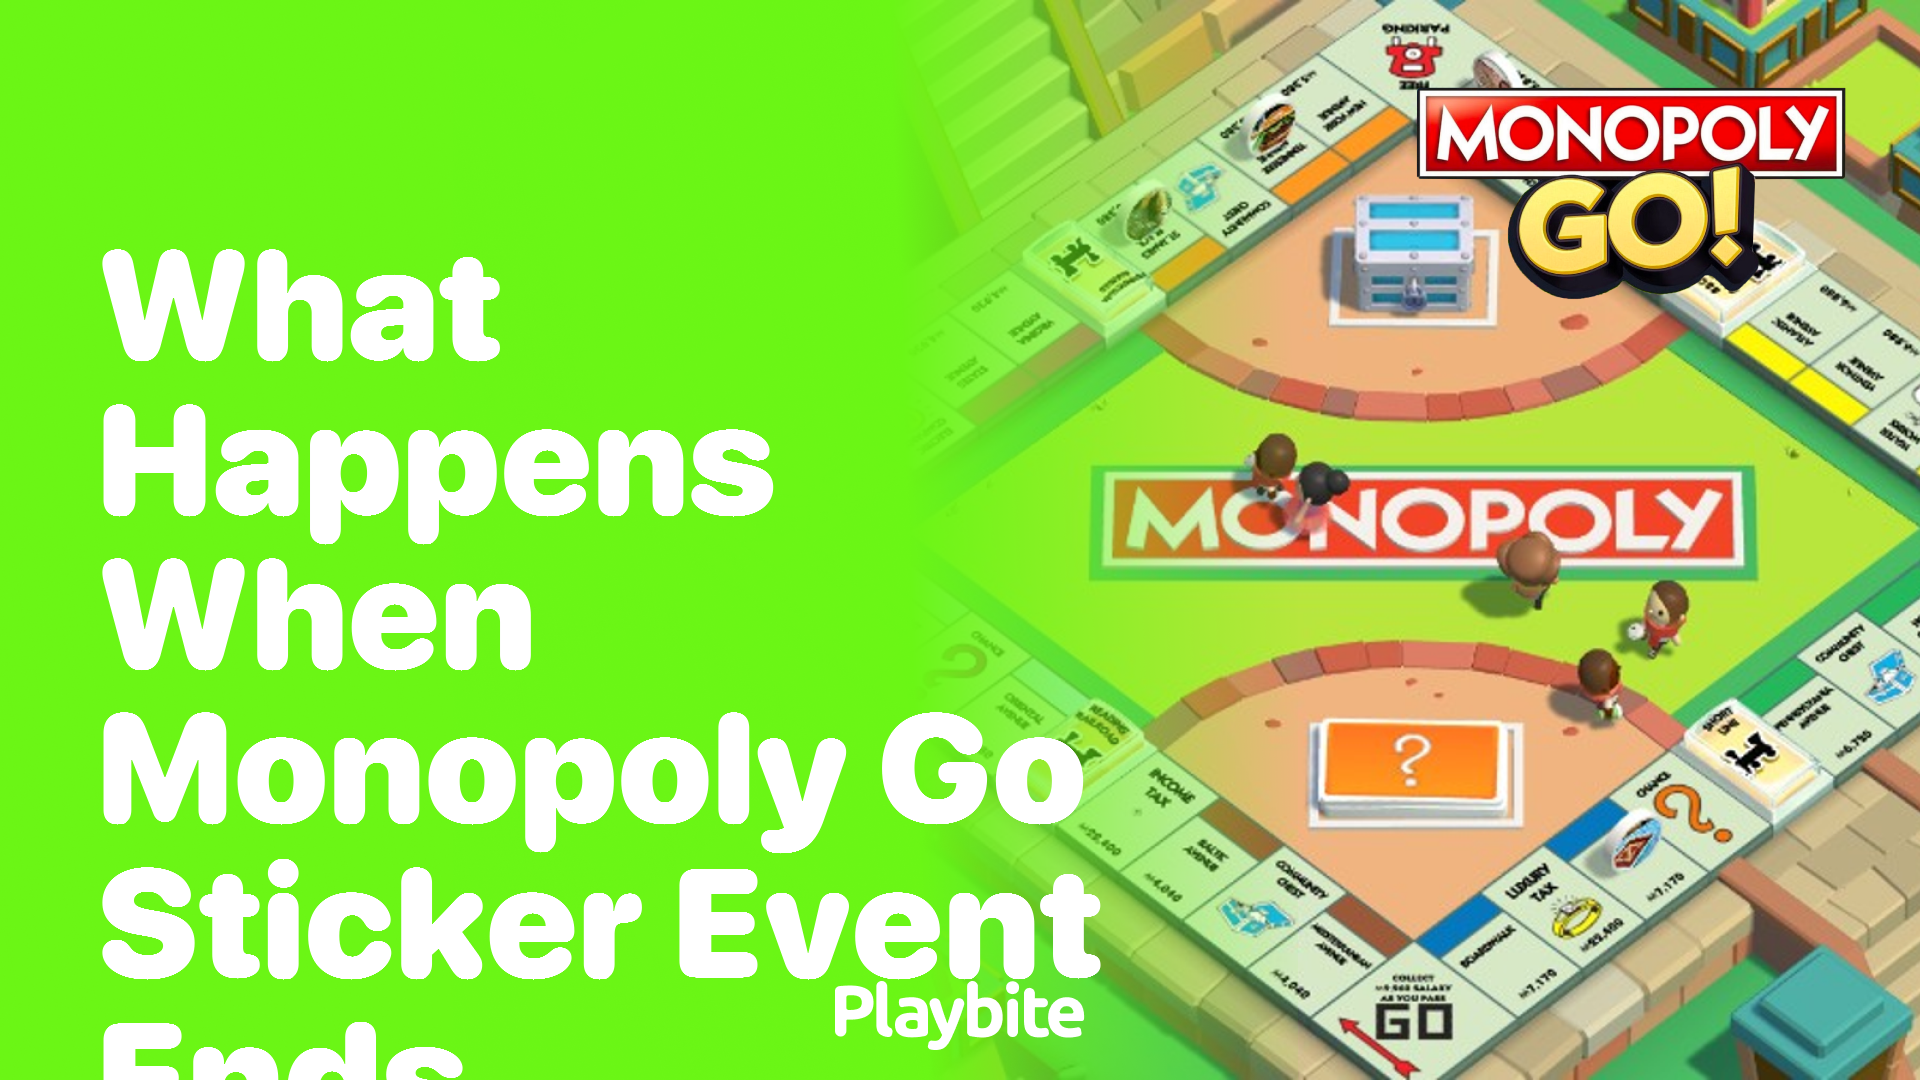 What Happens When the Monopoly Go Sticker Event Ends?